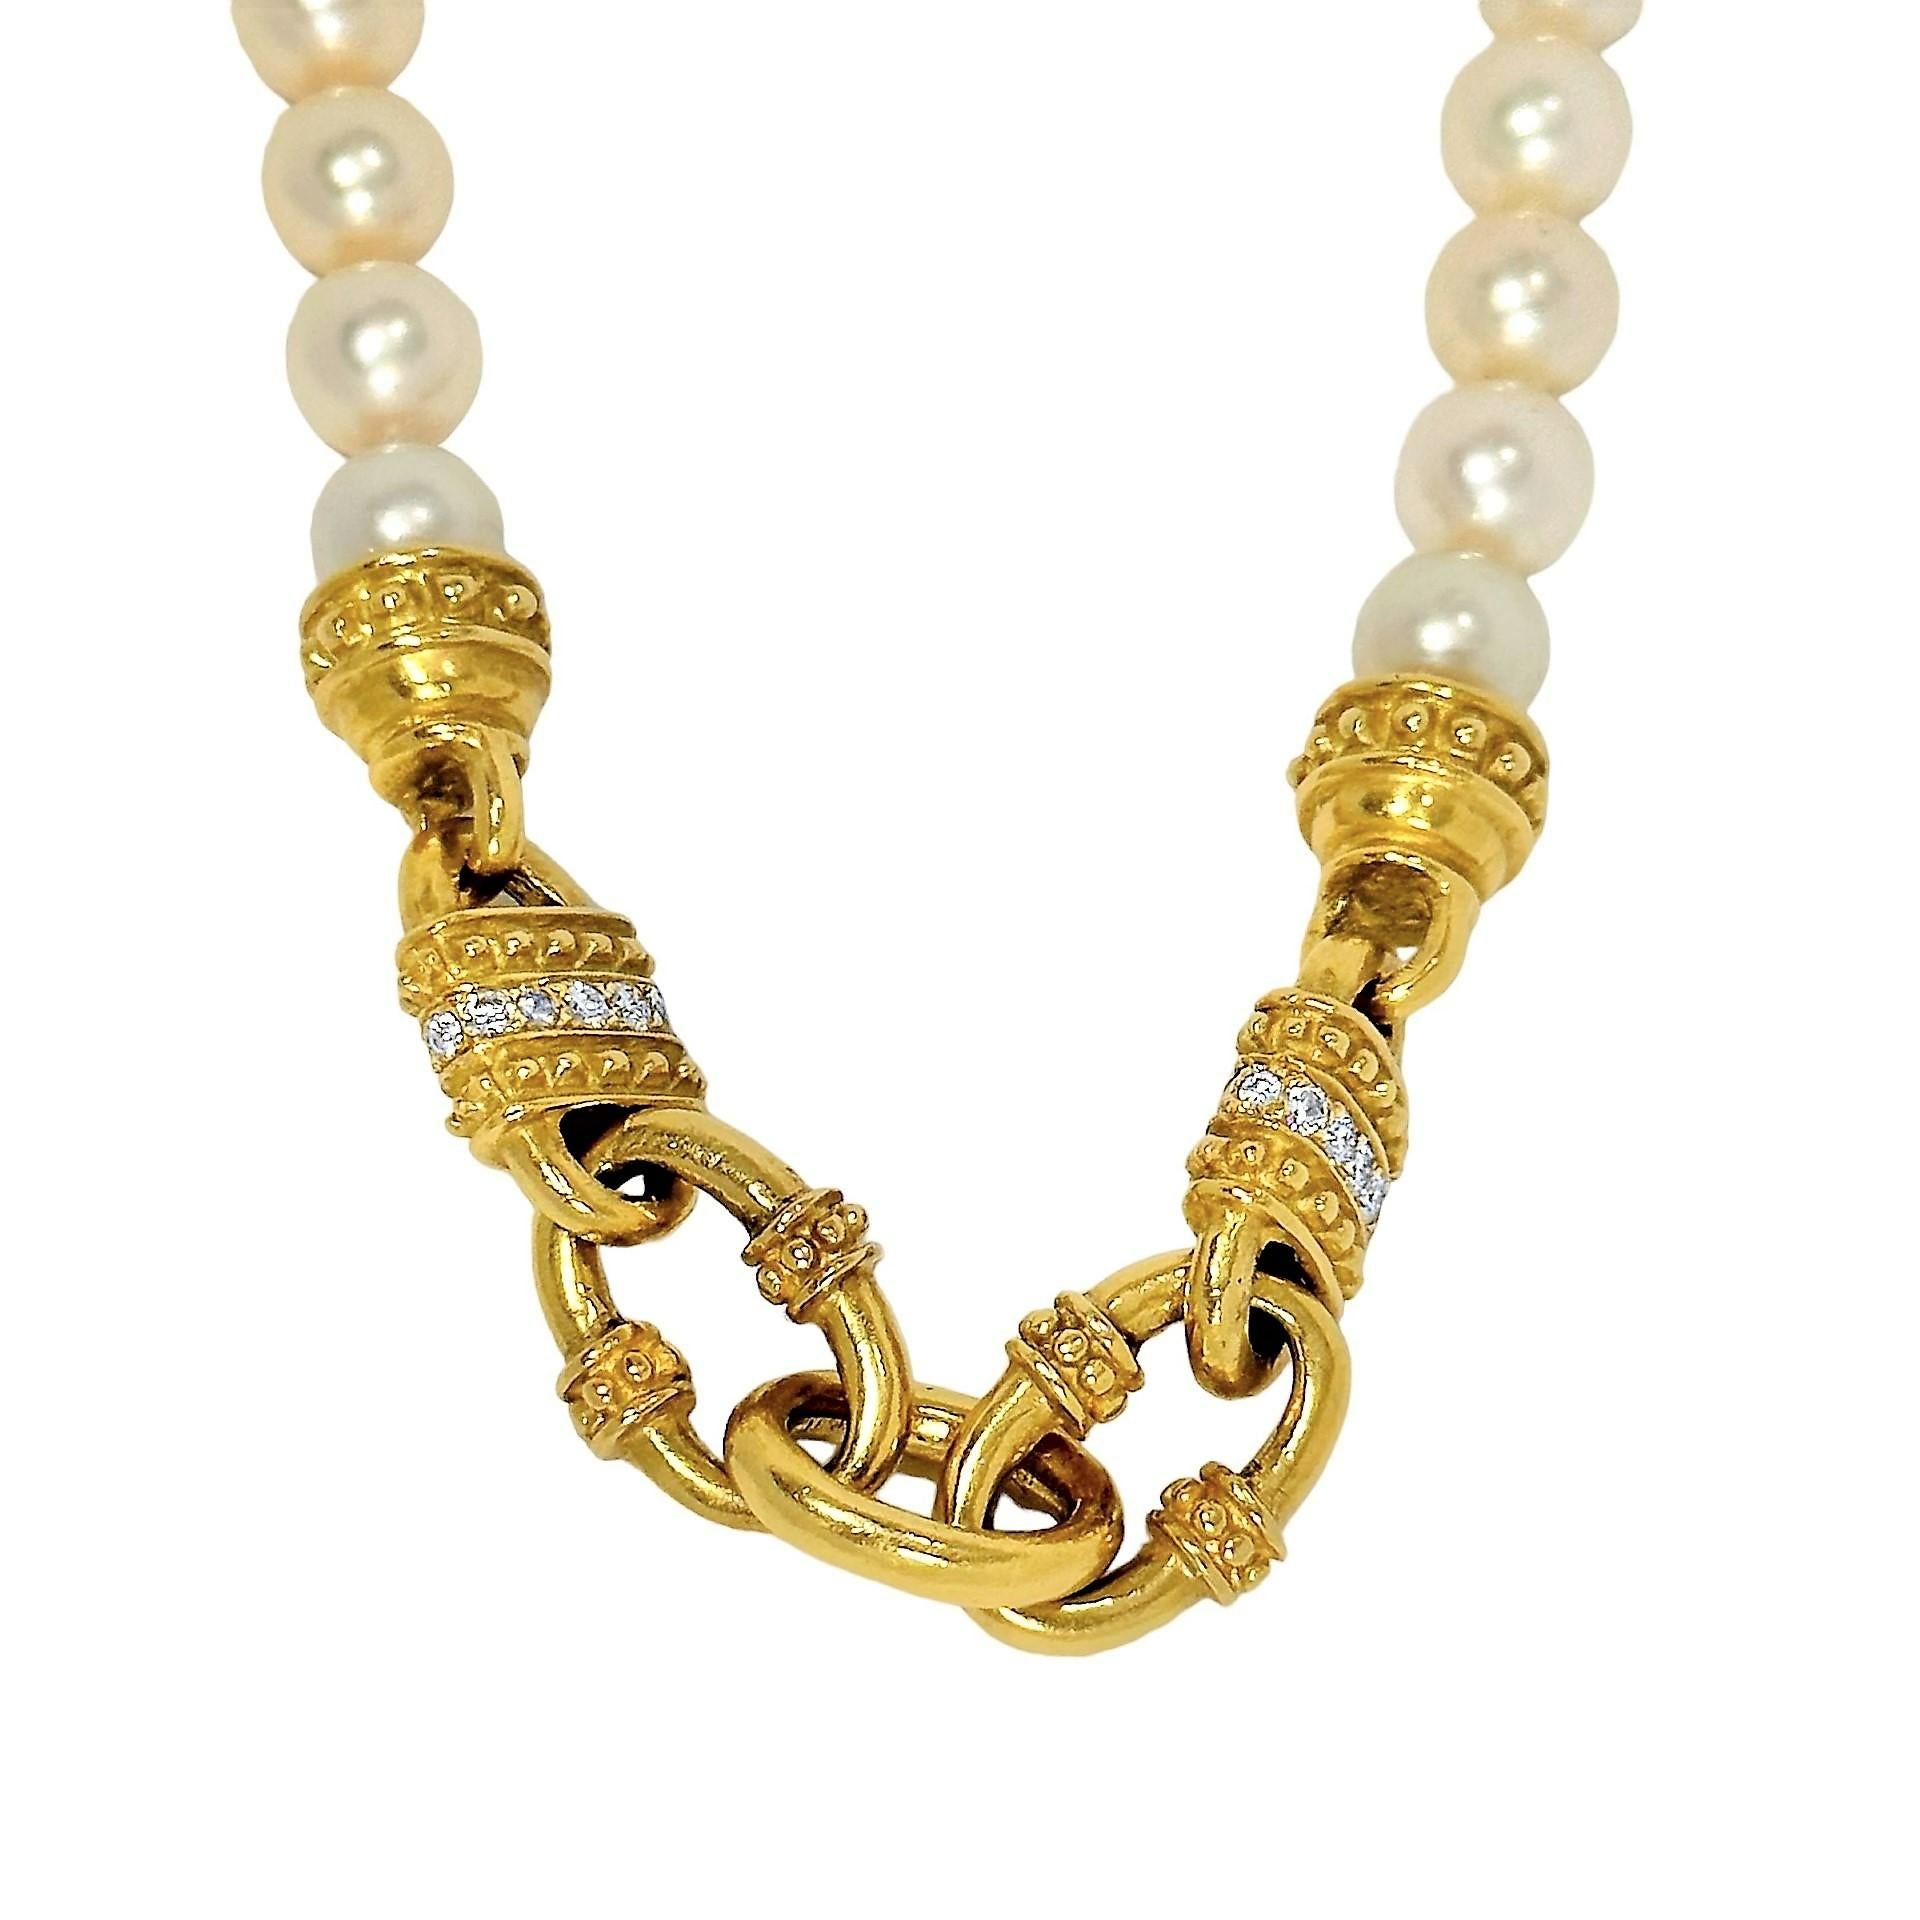 Judith Ripka 18k Gold Classic Revival Pearl Necklace with Special Features In Good Condition For Sale In Palm Beach, FL